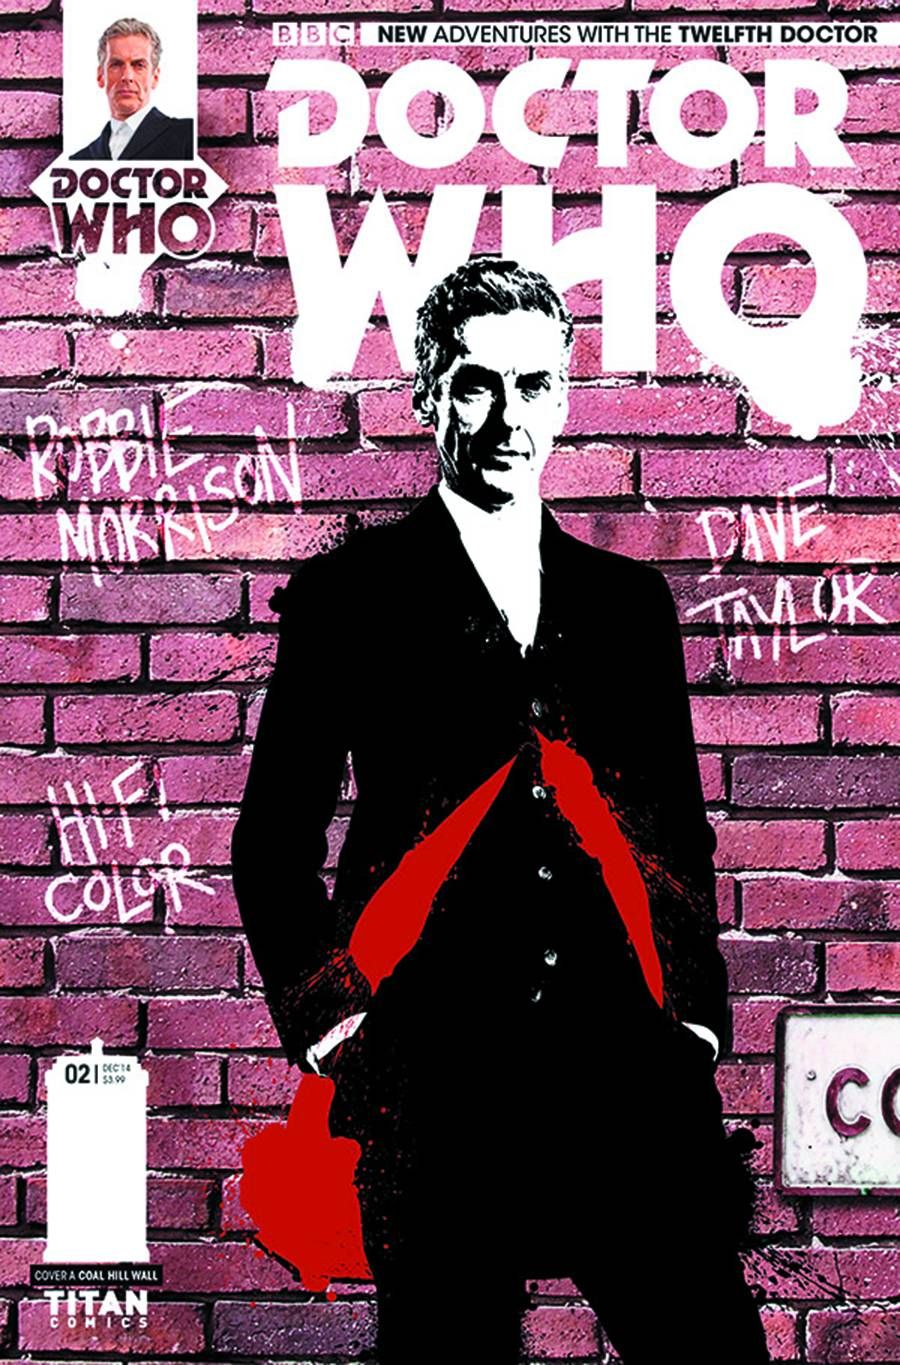 Doctor Who: The Twelfth Doctor #2 Comic